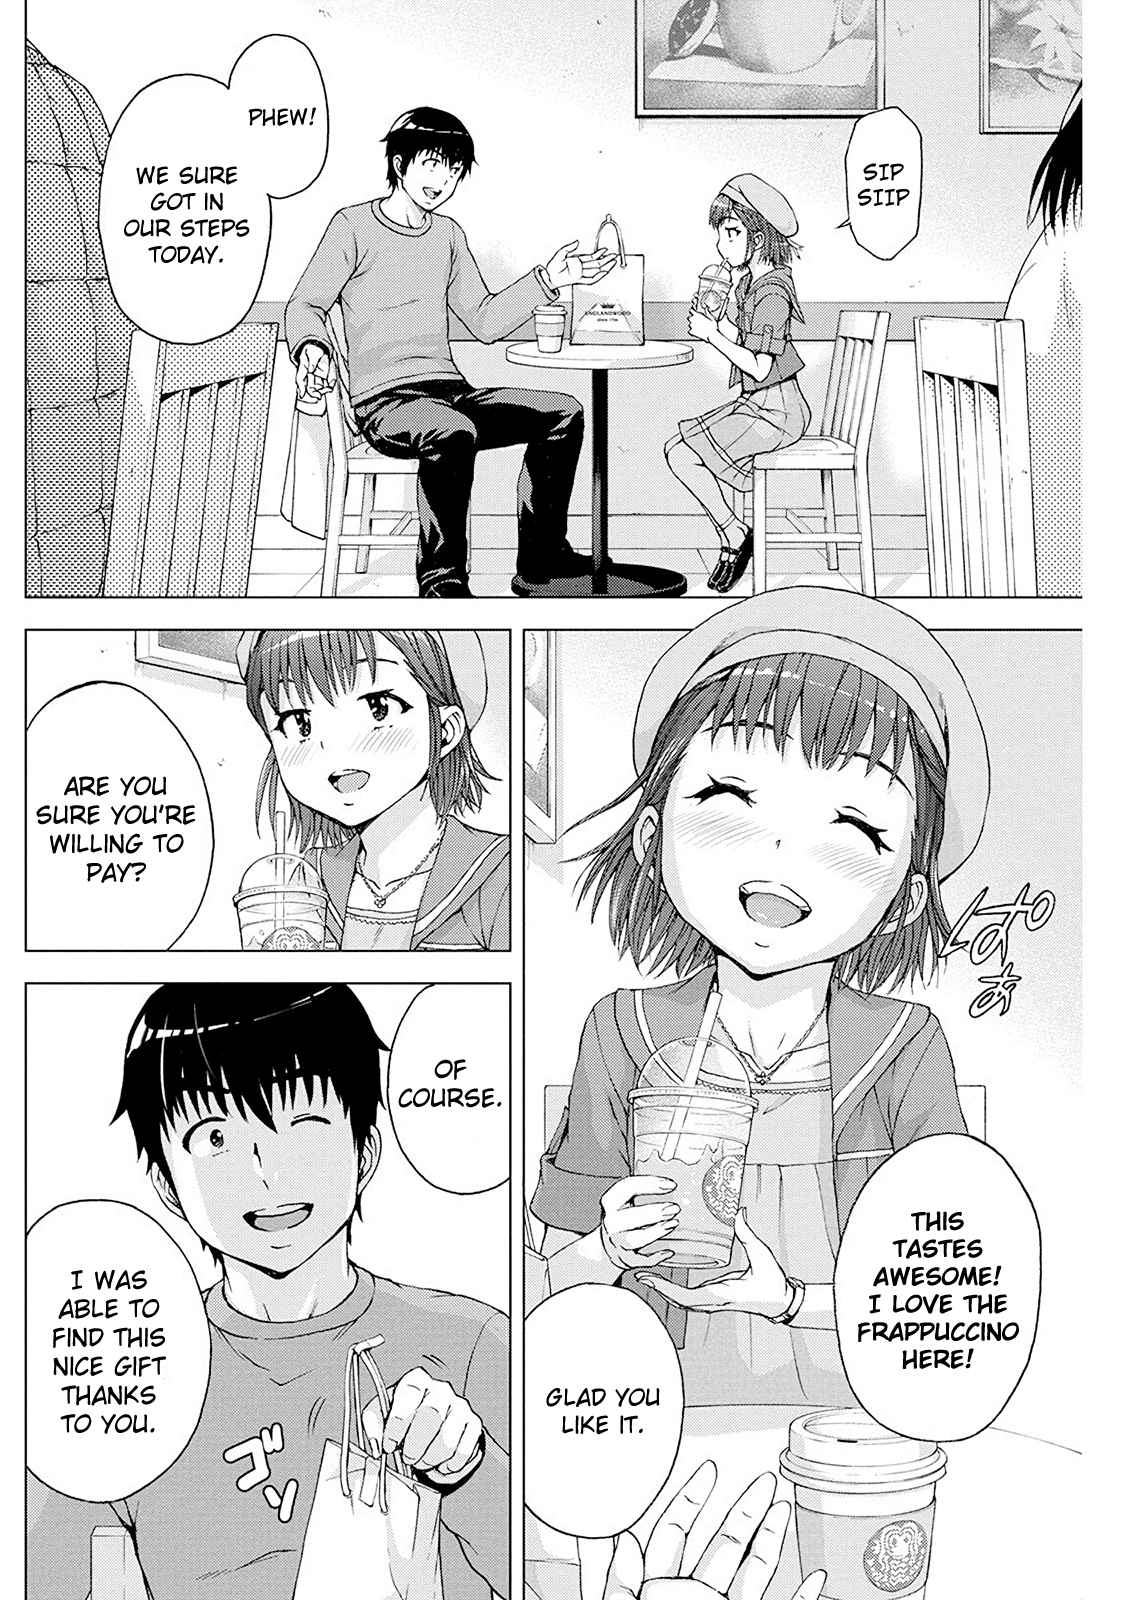 I'm Not a Lolicon! Vol. 2 Ch. 8 Joined at the Hips